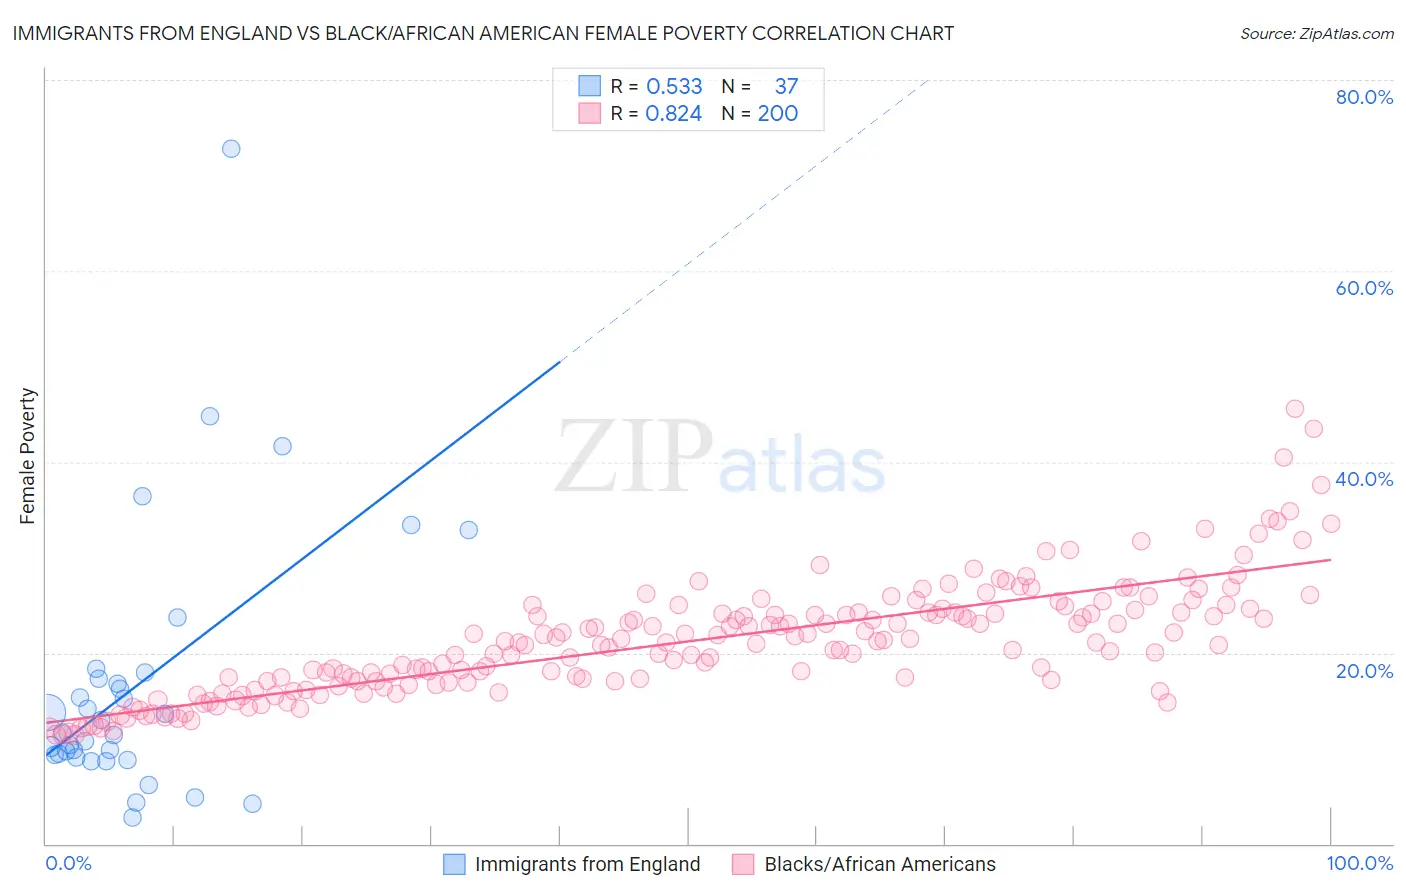 Immigrants from England vs Black/African American Female Poverty